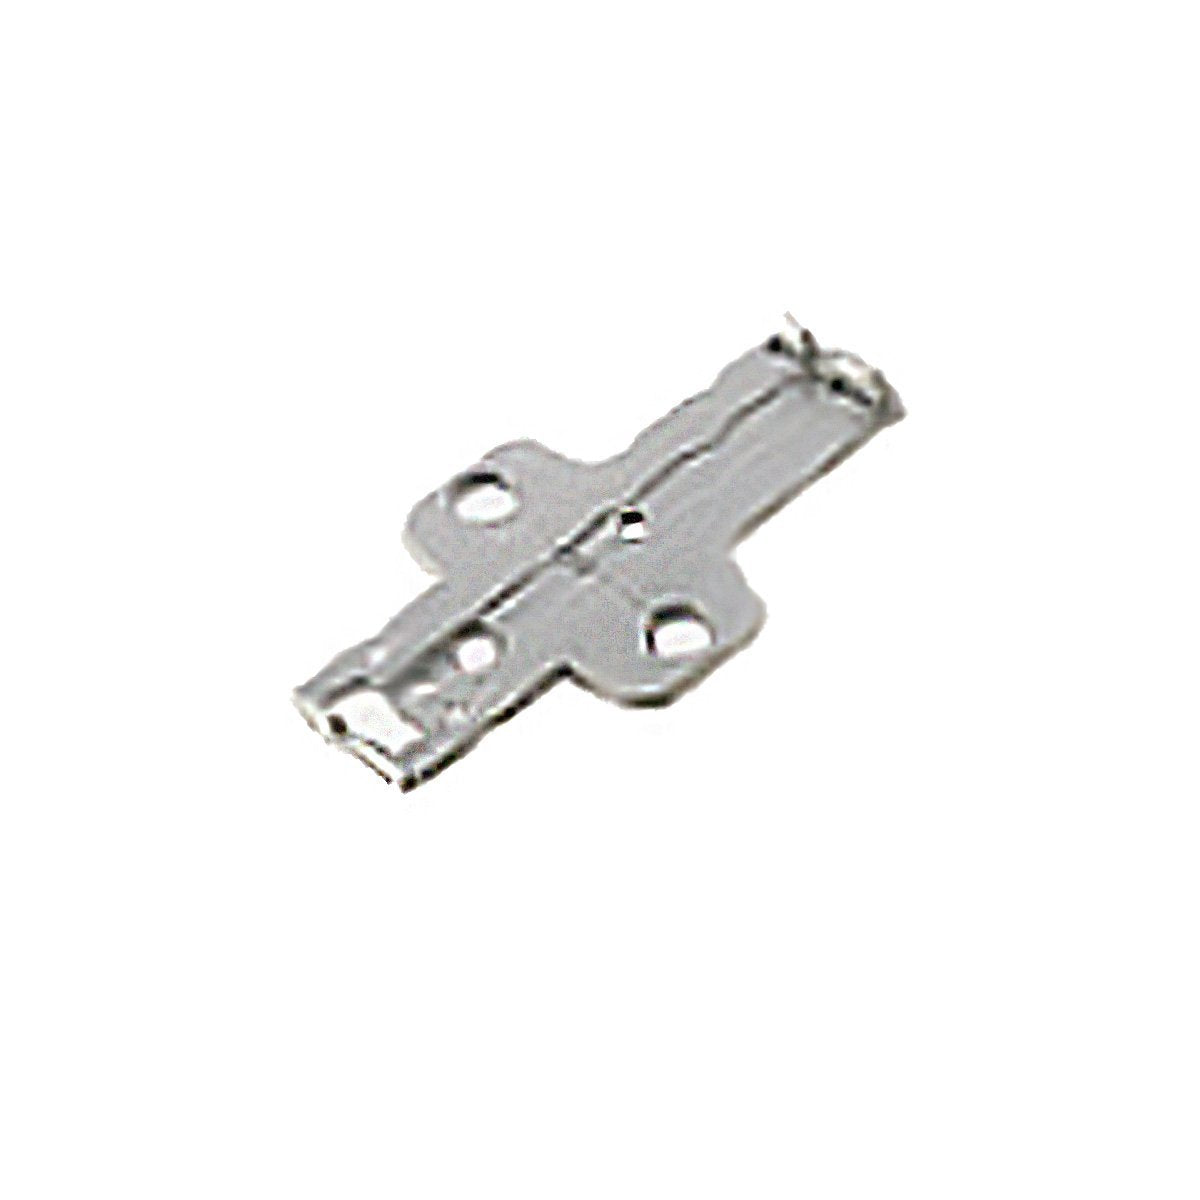 Push Latch with Mounting Plate